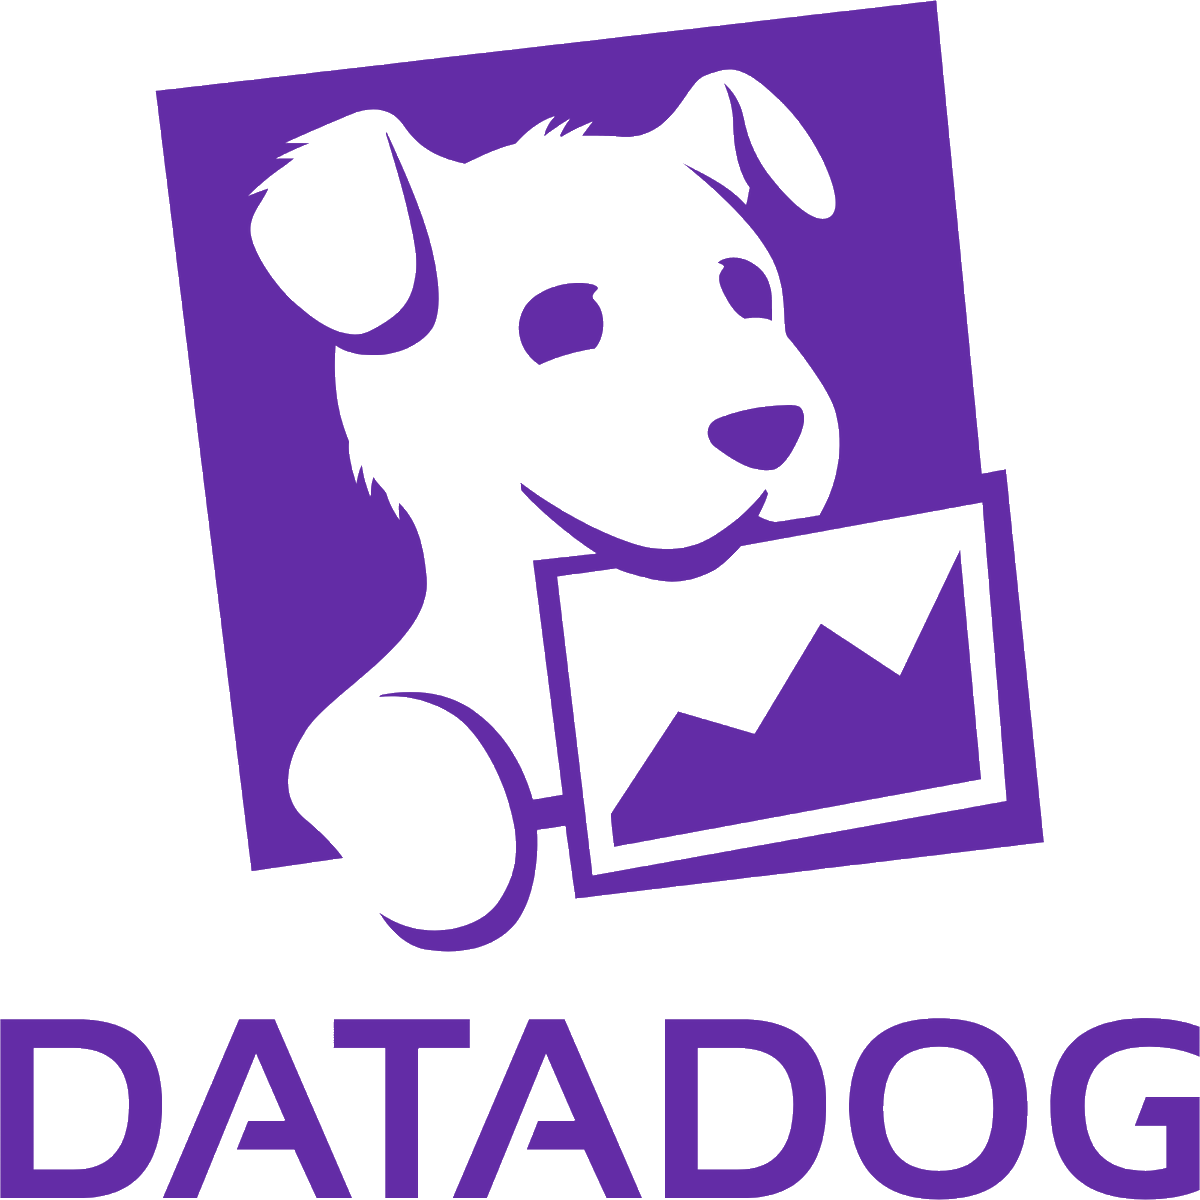 $DOOG Key points from Datadog’s First Quarter 2024 Earnings Call:

Strong Financial Performance
Datadog reported revenue of $611 million, marking a 27% increase year-over-year, which was above their guidance range. They also generated a significant free cash flow of $187 million…